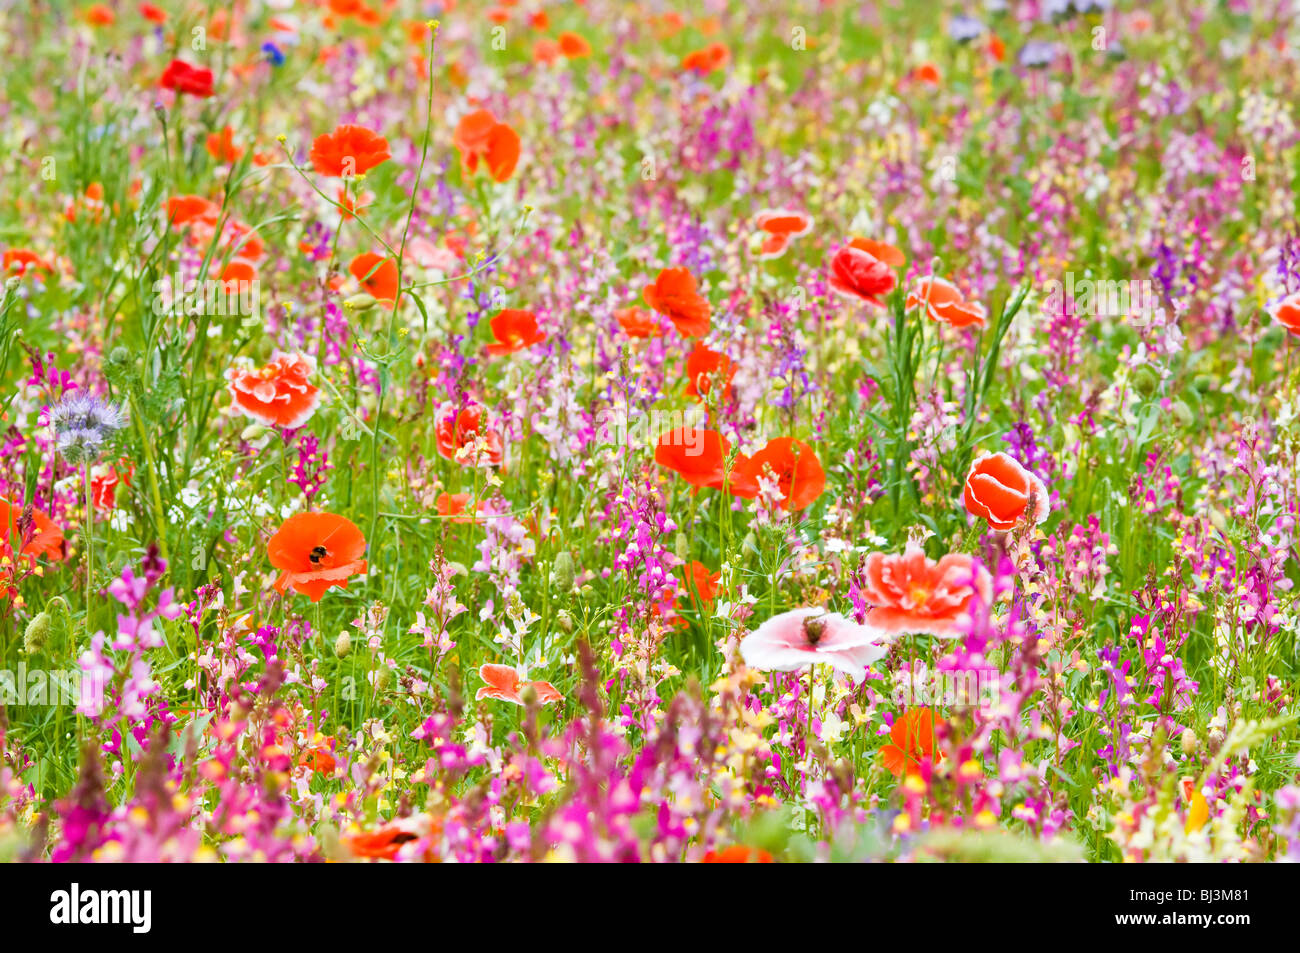 Many species of colourful wild flowers in a meadow Stock Photo